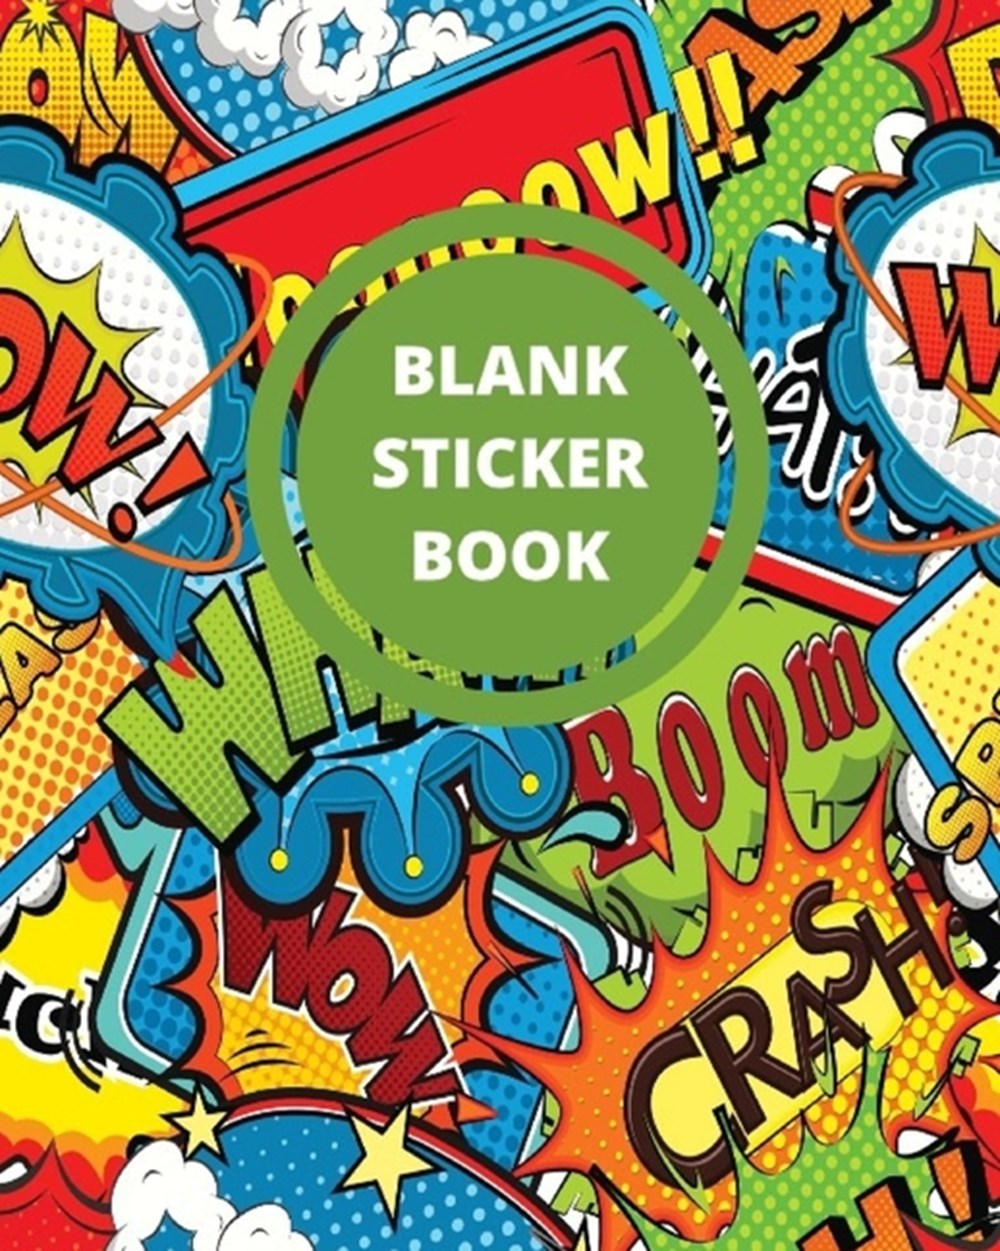 Blank Sticker Book Comic Book Green and Red Adventure Superhero Blank Sticker Album, Sticker Album F